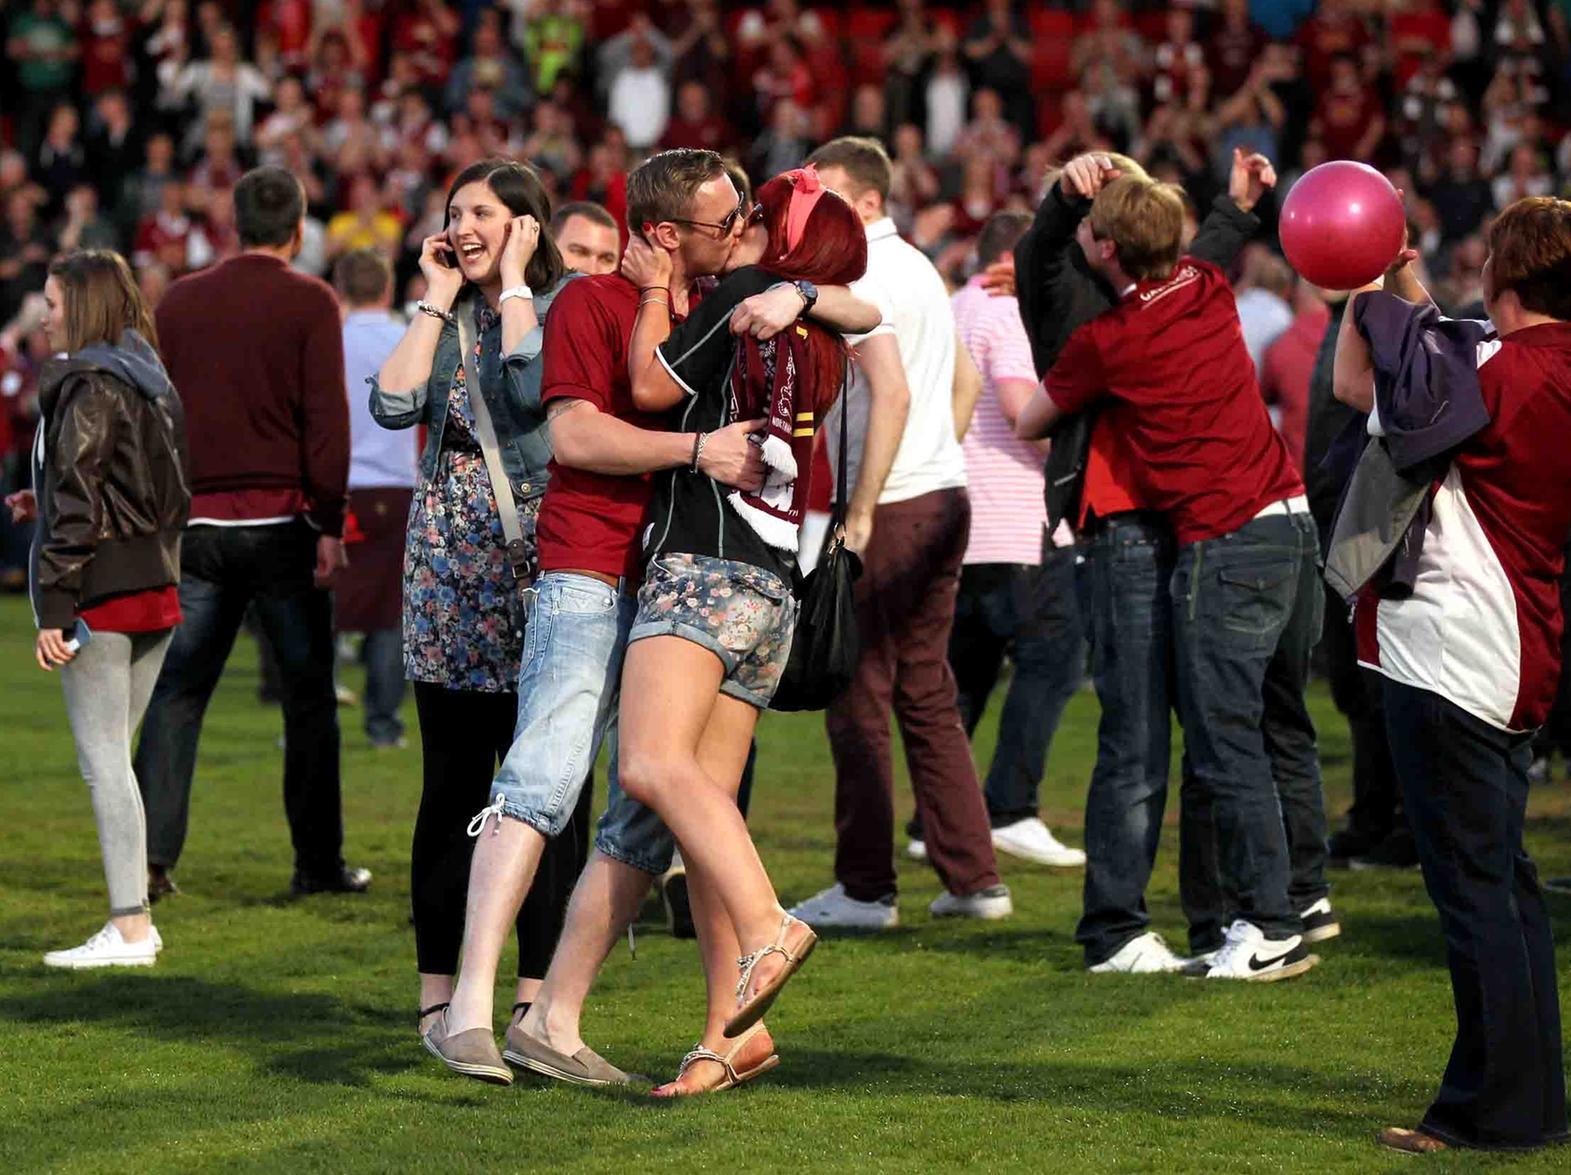 The win over Cheltenham was sealed with a kiss between these two fans